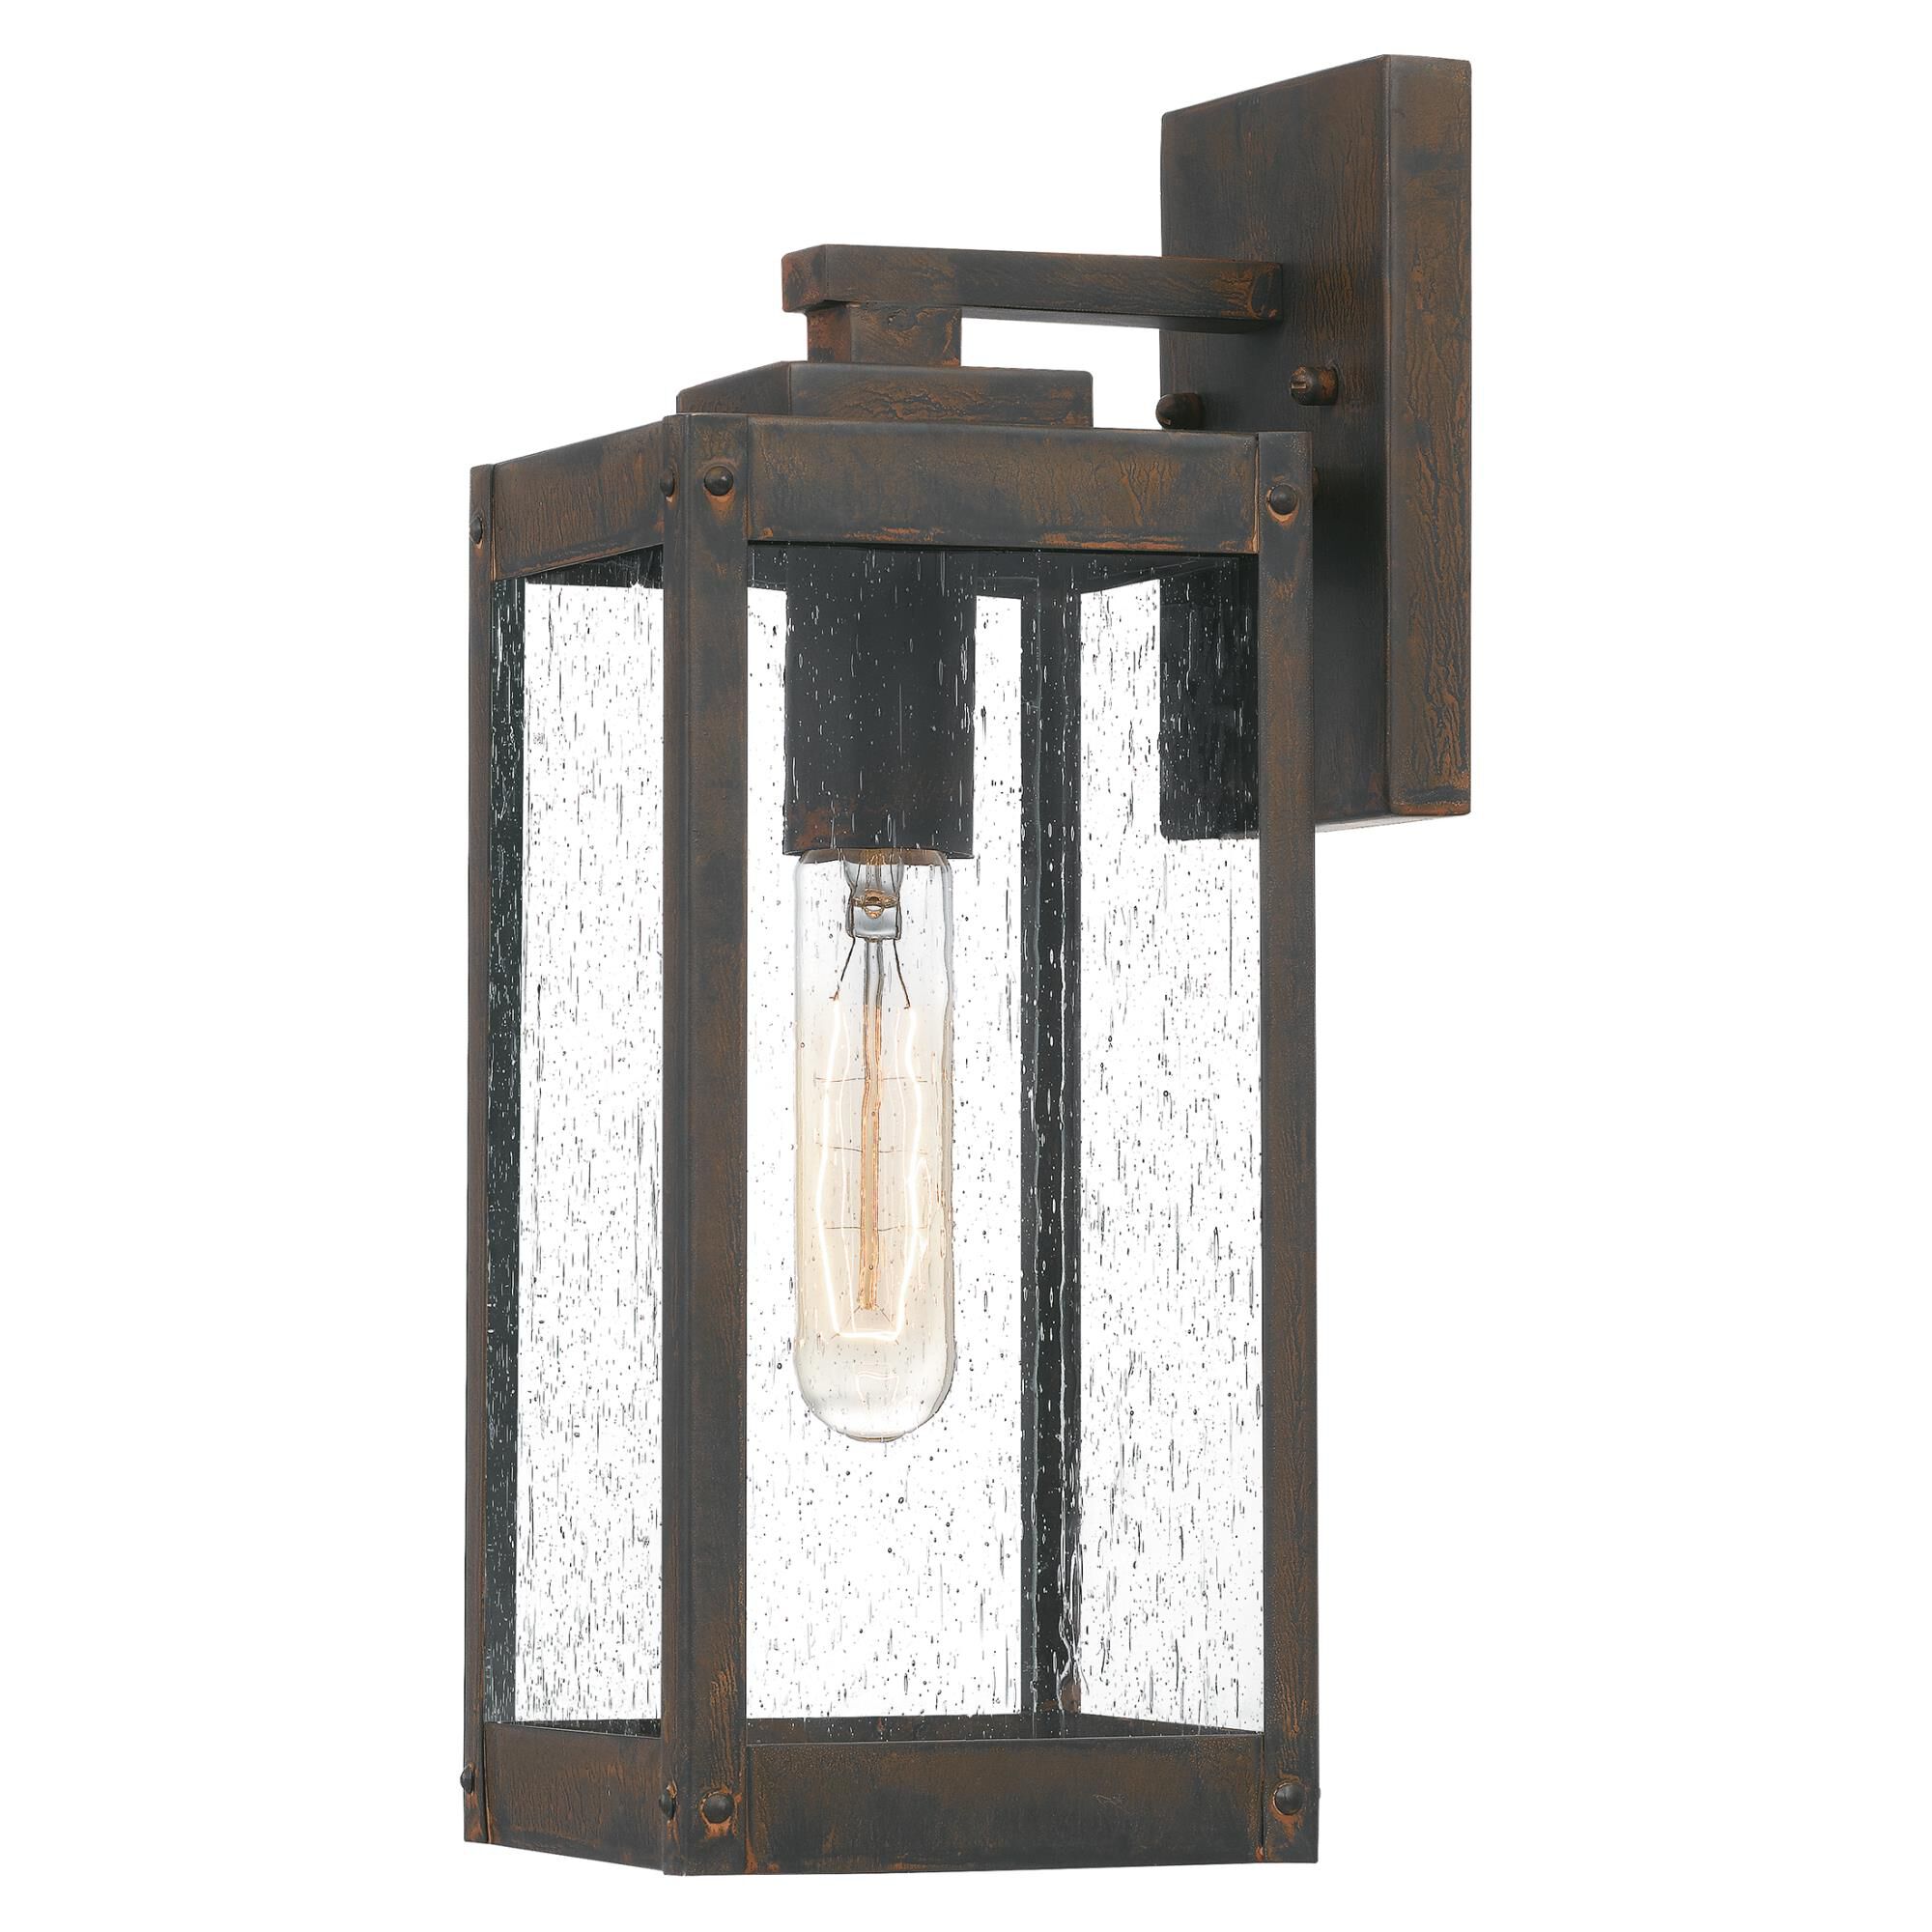 Photos - Chandelier / Lamp Quoizel Westover 14 Inch Tall Outdoor Wall Light Westover - WVR8405IZ - Tr 